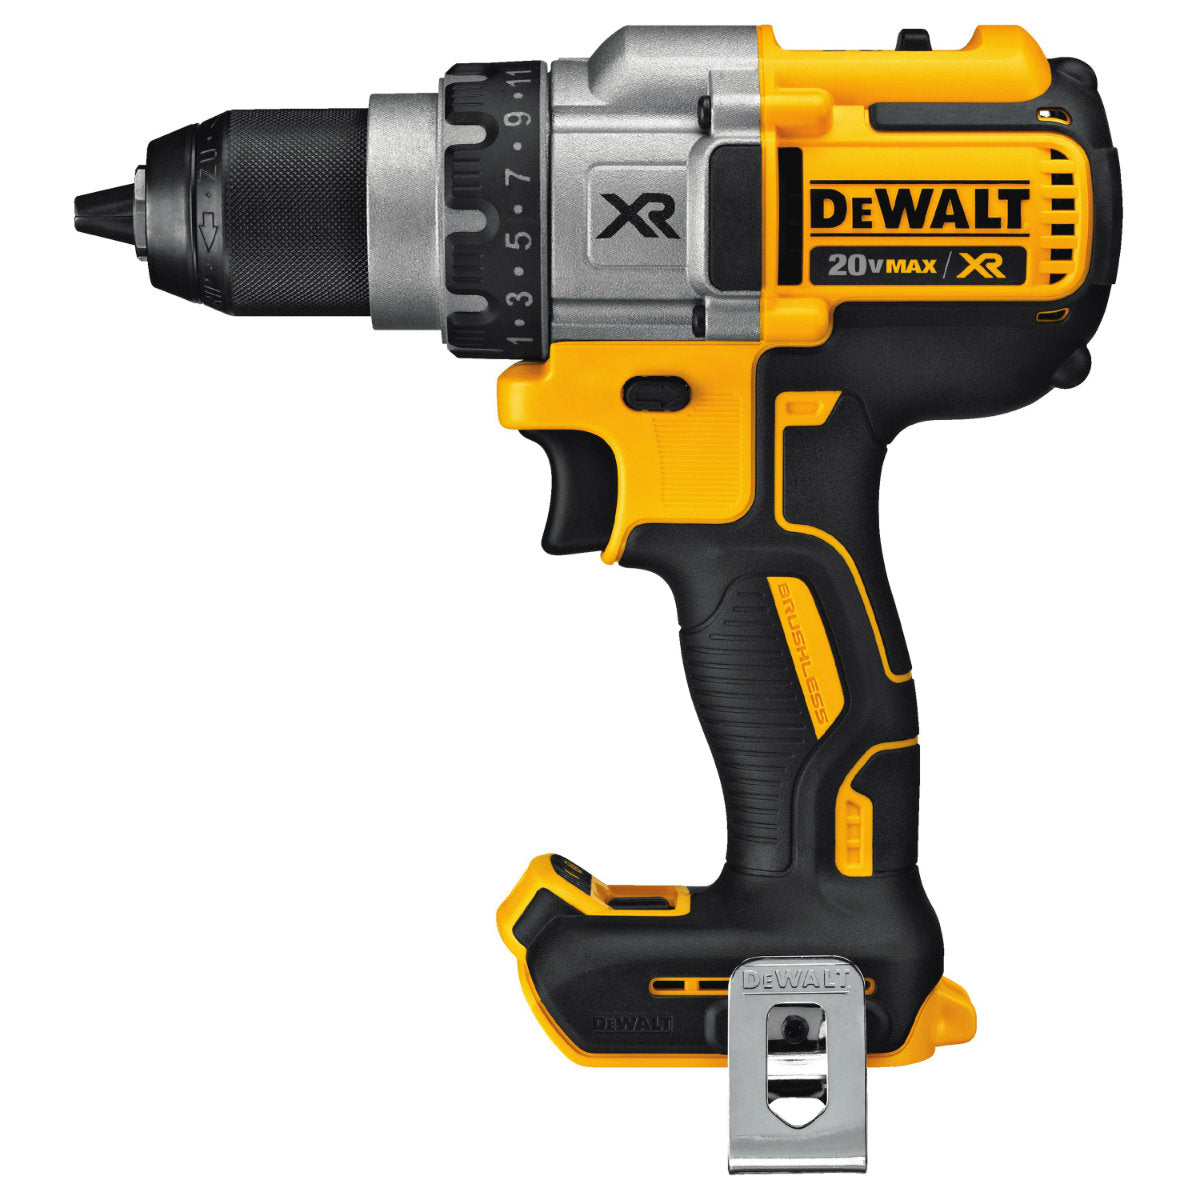 DeWalt DCD991B 20V MAX XR Lithium Ion Brushless 3-Speed Drill/Driver, Tool Only